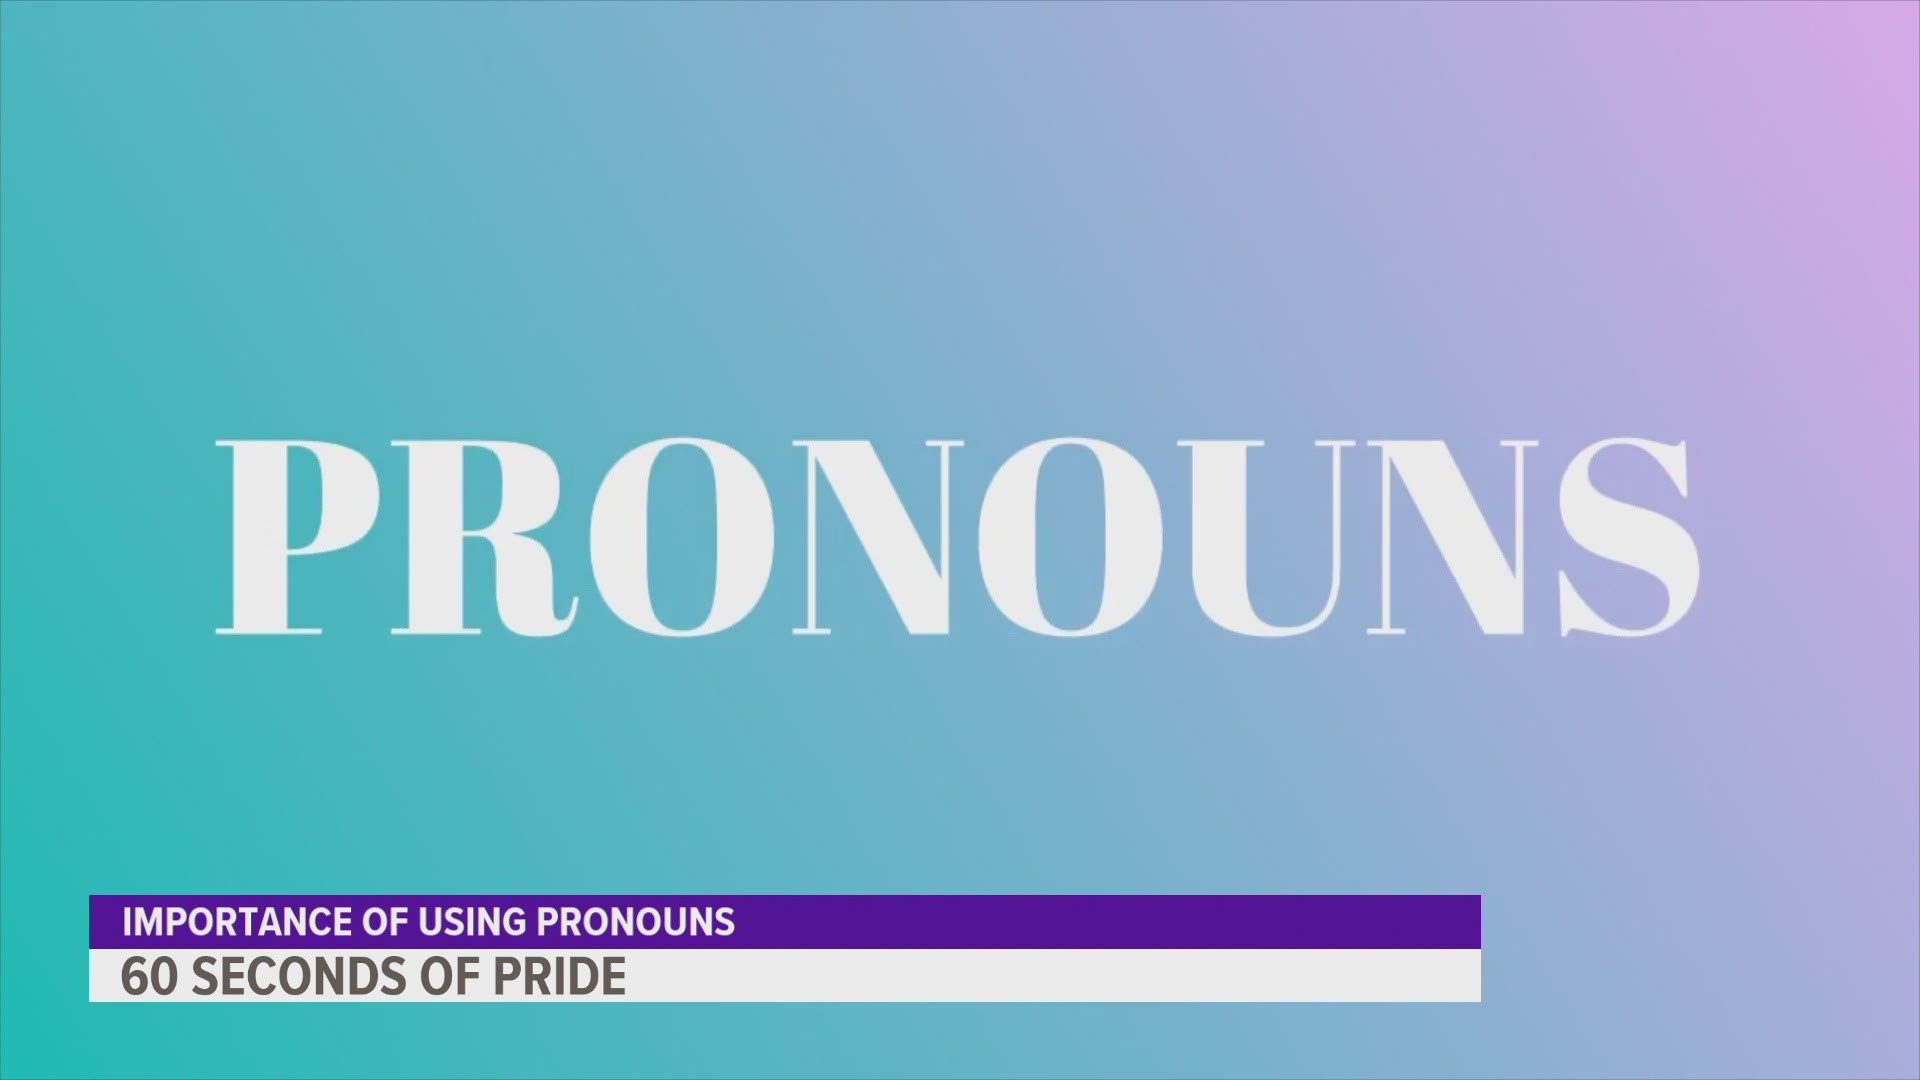 Pronouns probably aren't something you think about every day. But if you are transgender, gender queer or another gender variant, it's hugely important.